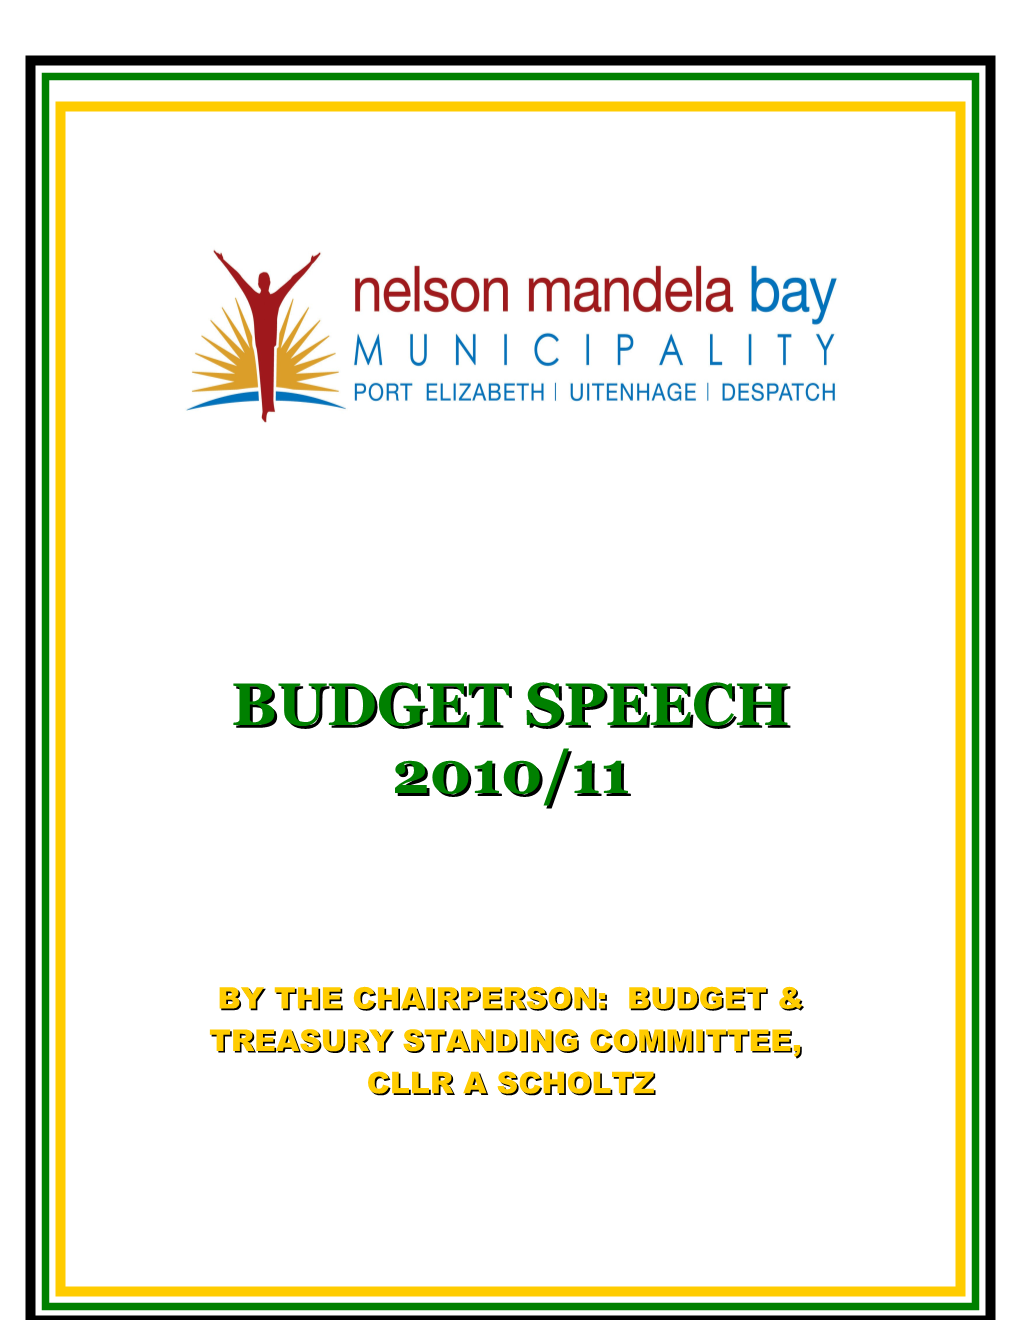 By the Chairperson: Budget & Treasury Standing Committee